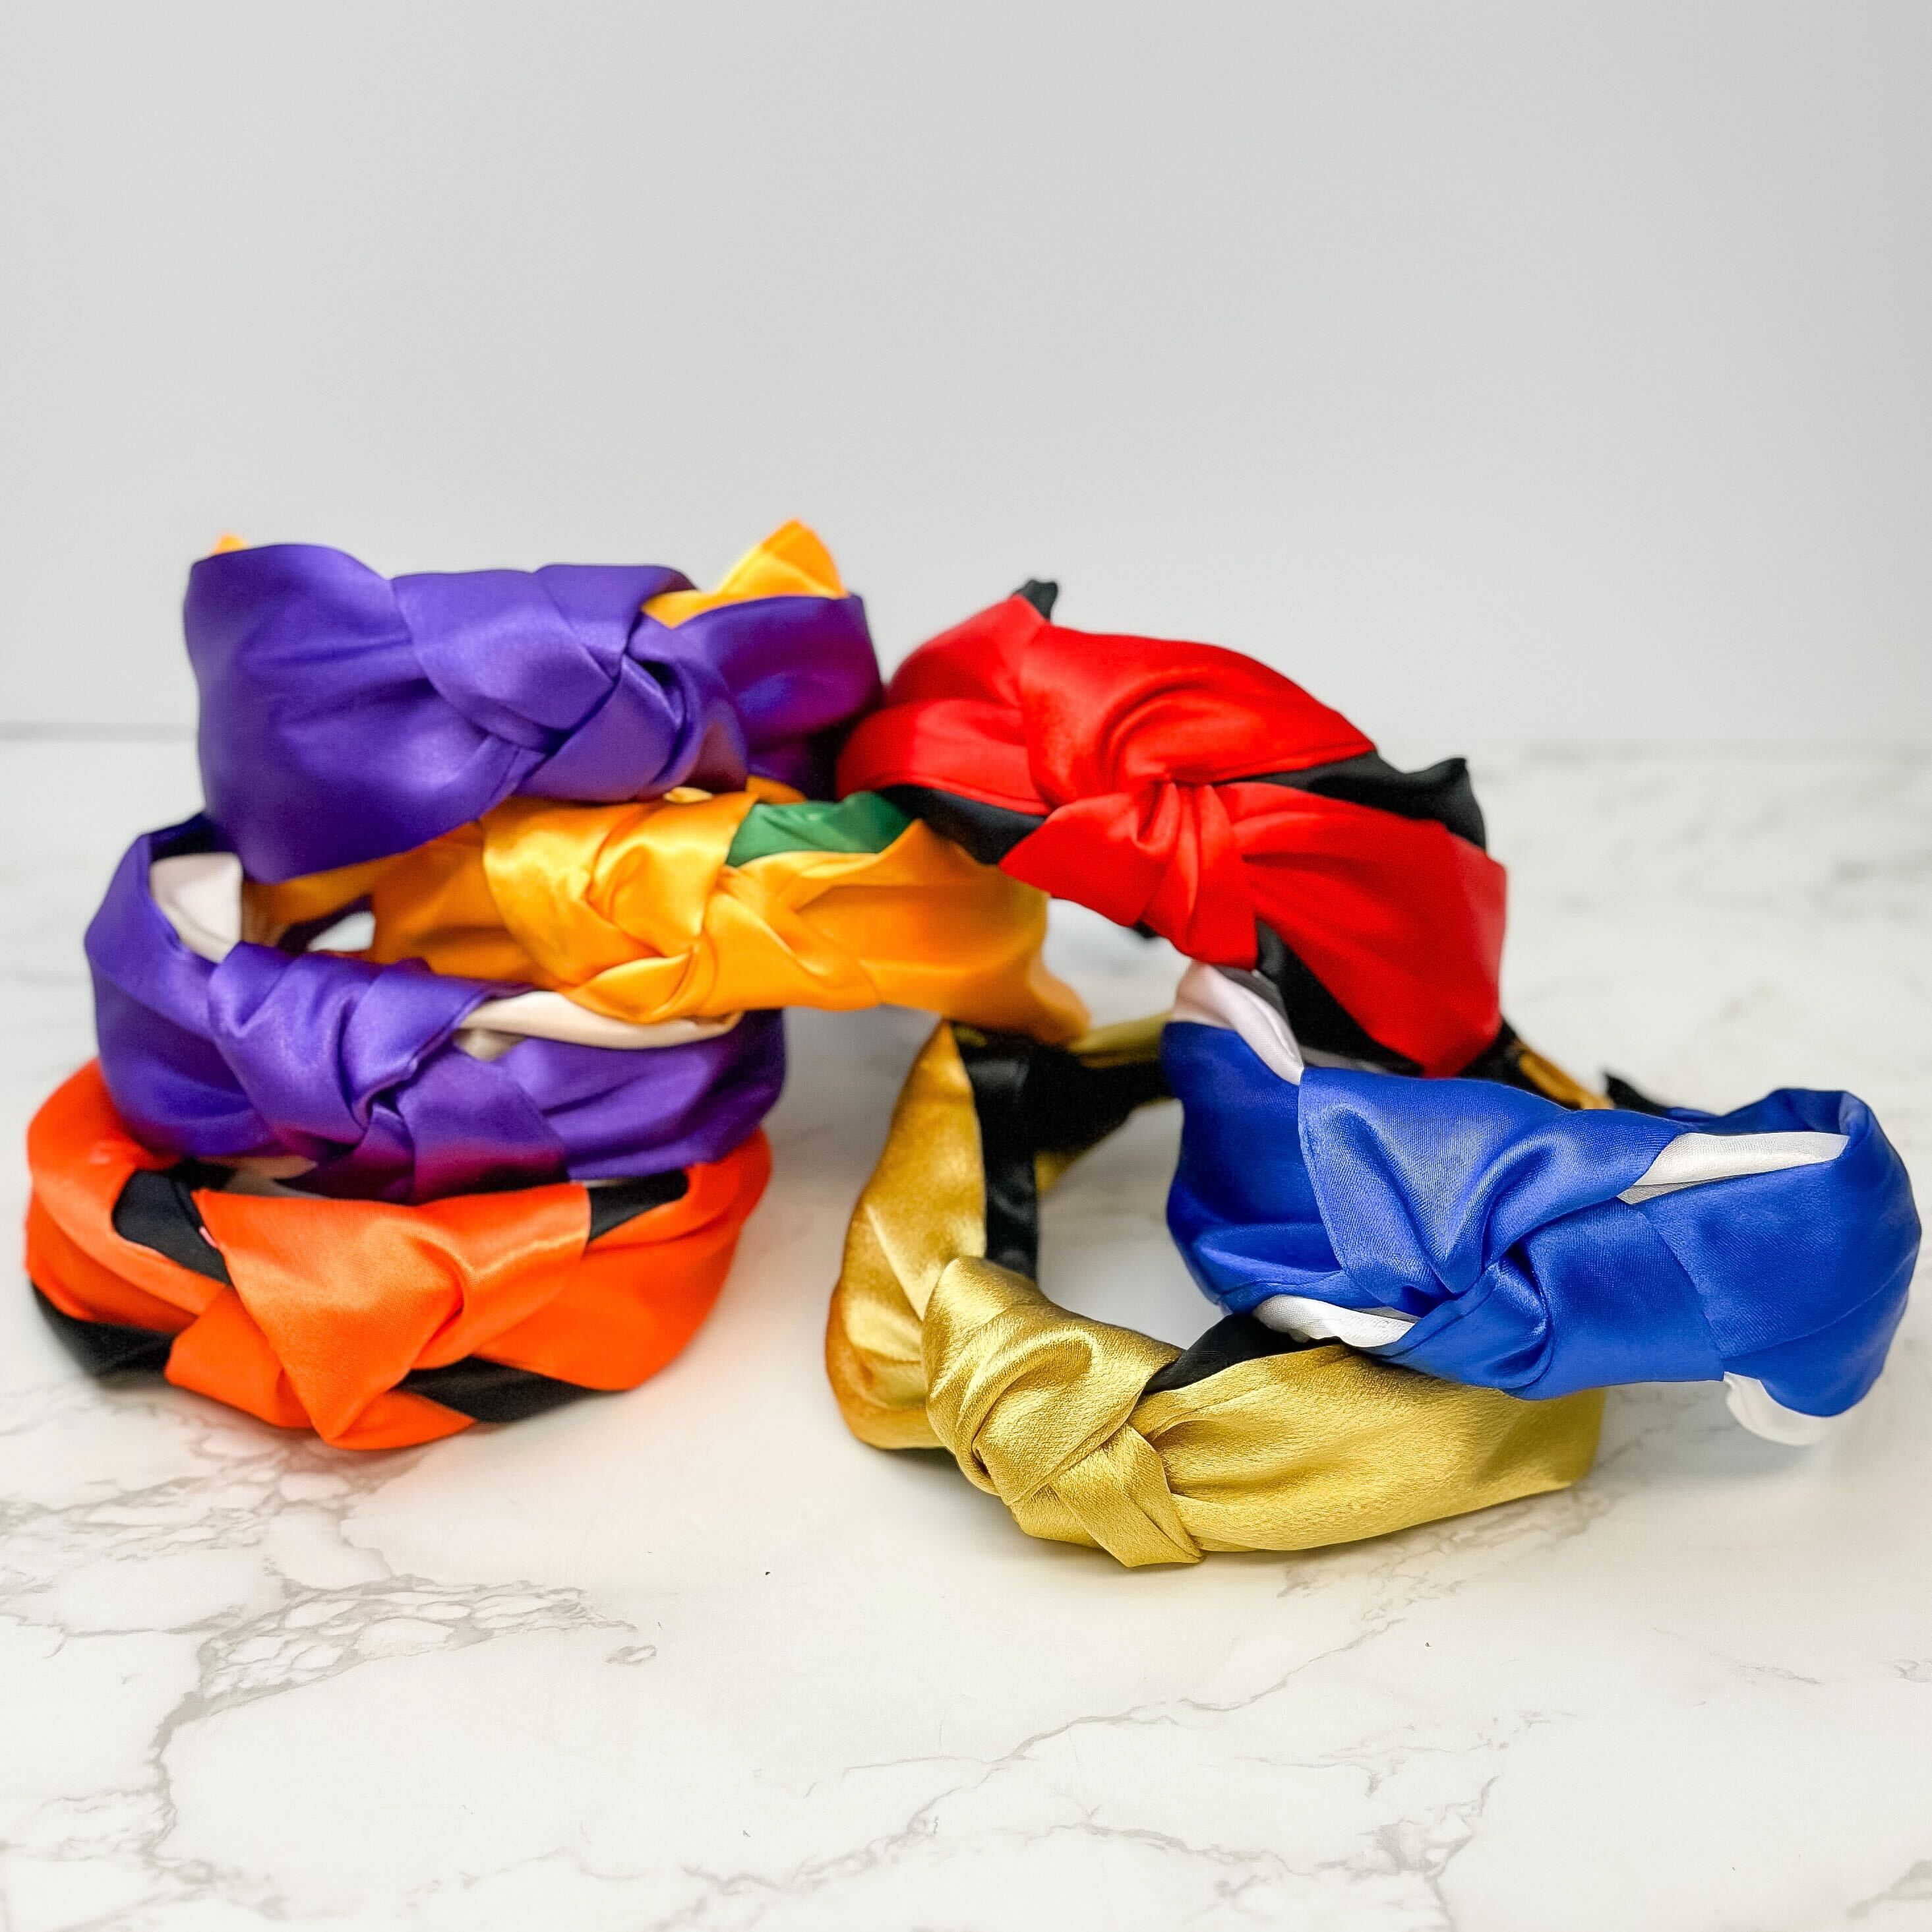 Jumbo Puffy Knotted Headbands - Red & Black